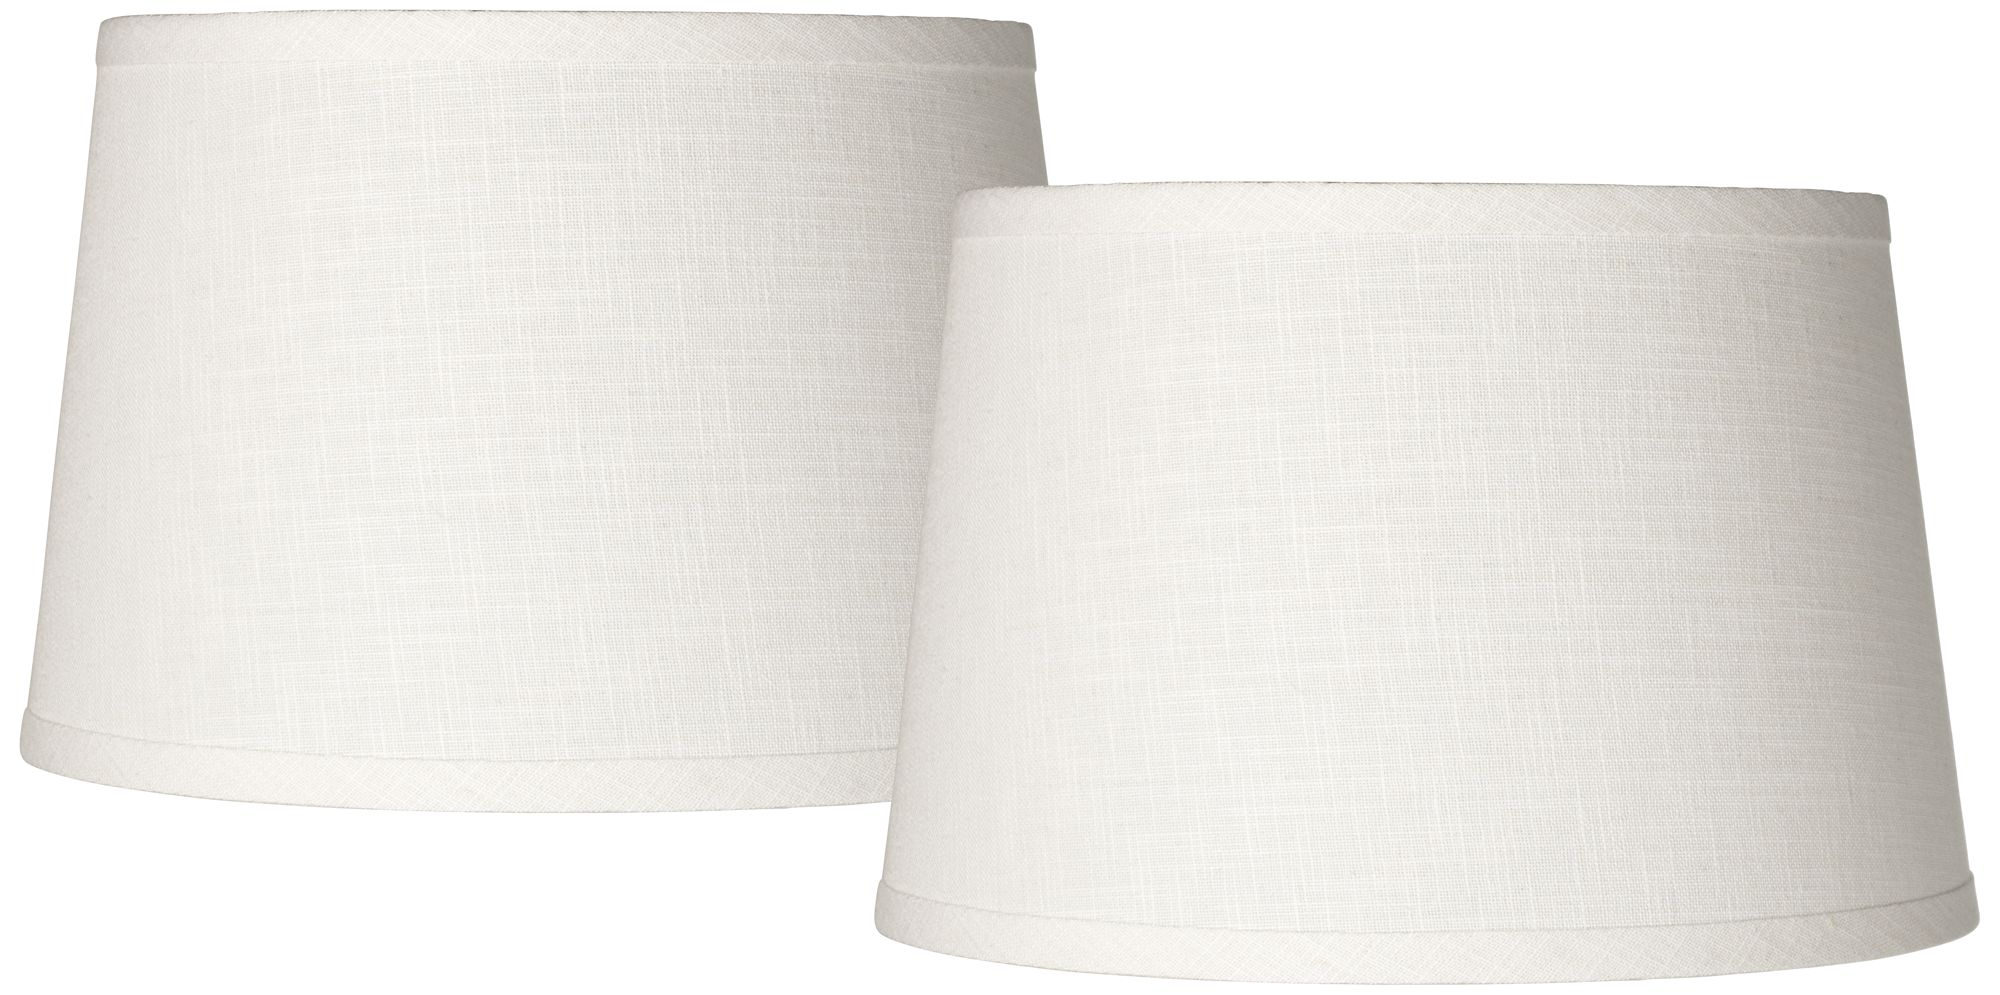 small lampshades for bedside lamps